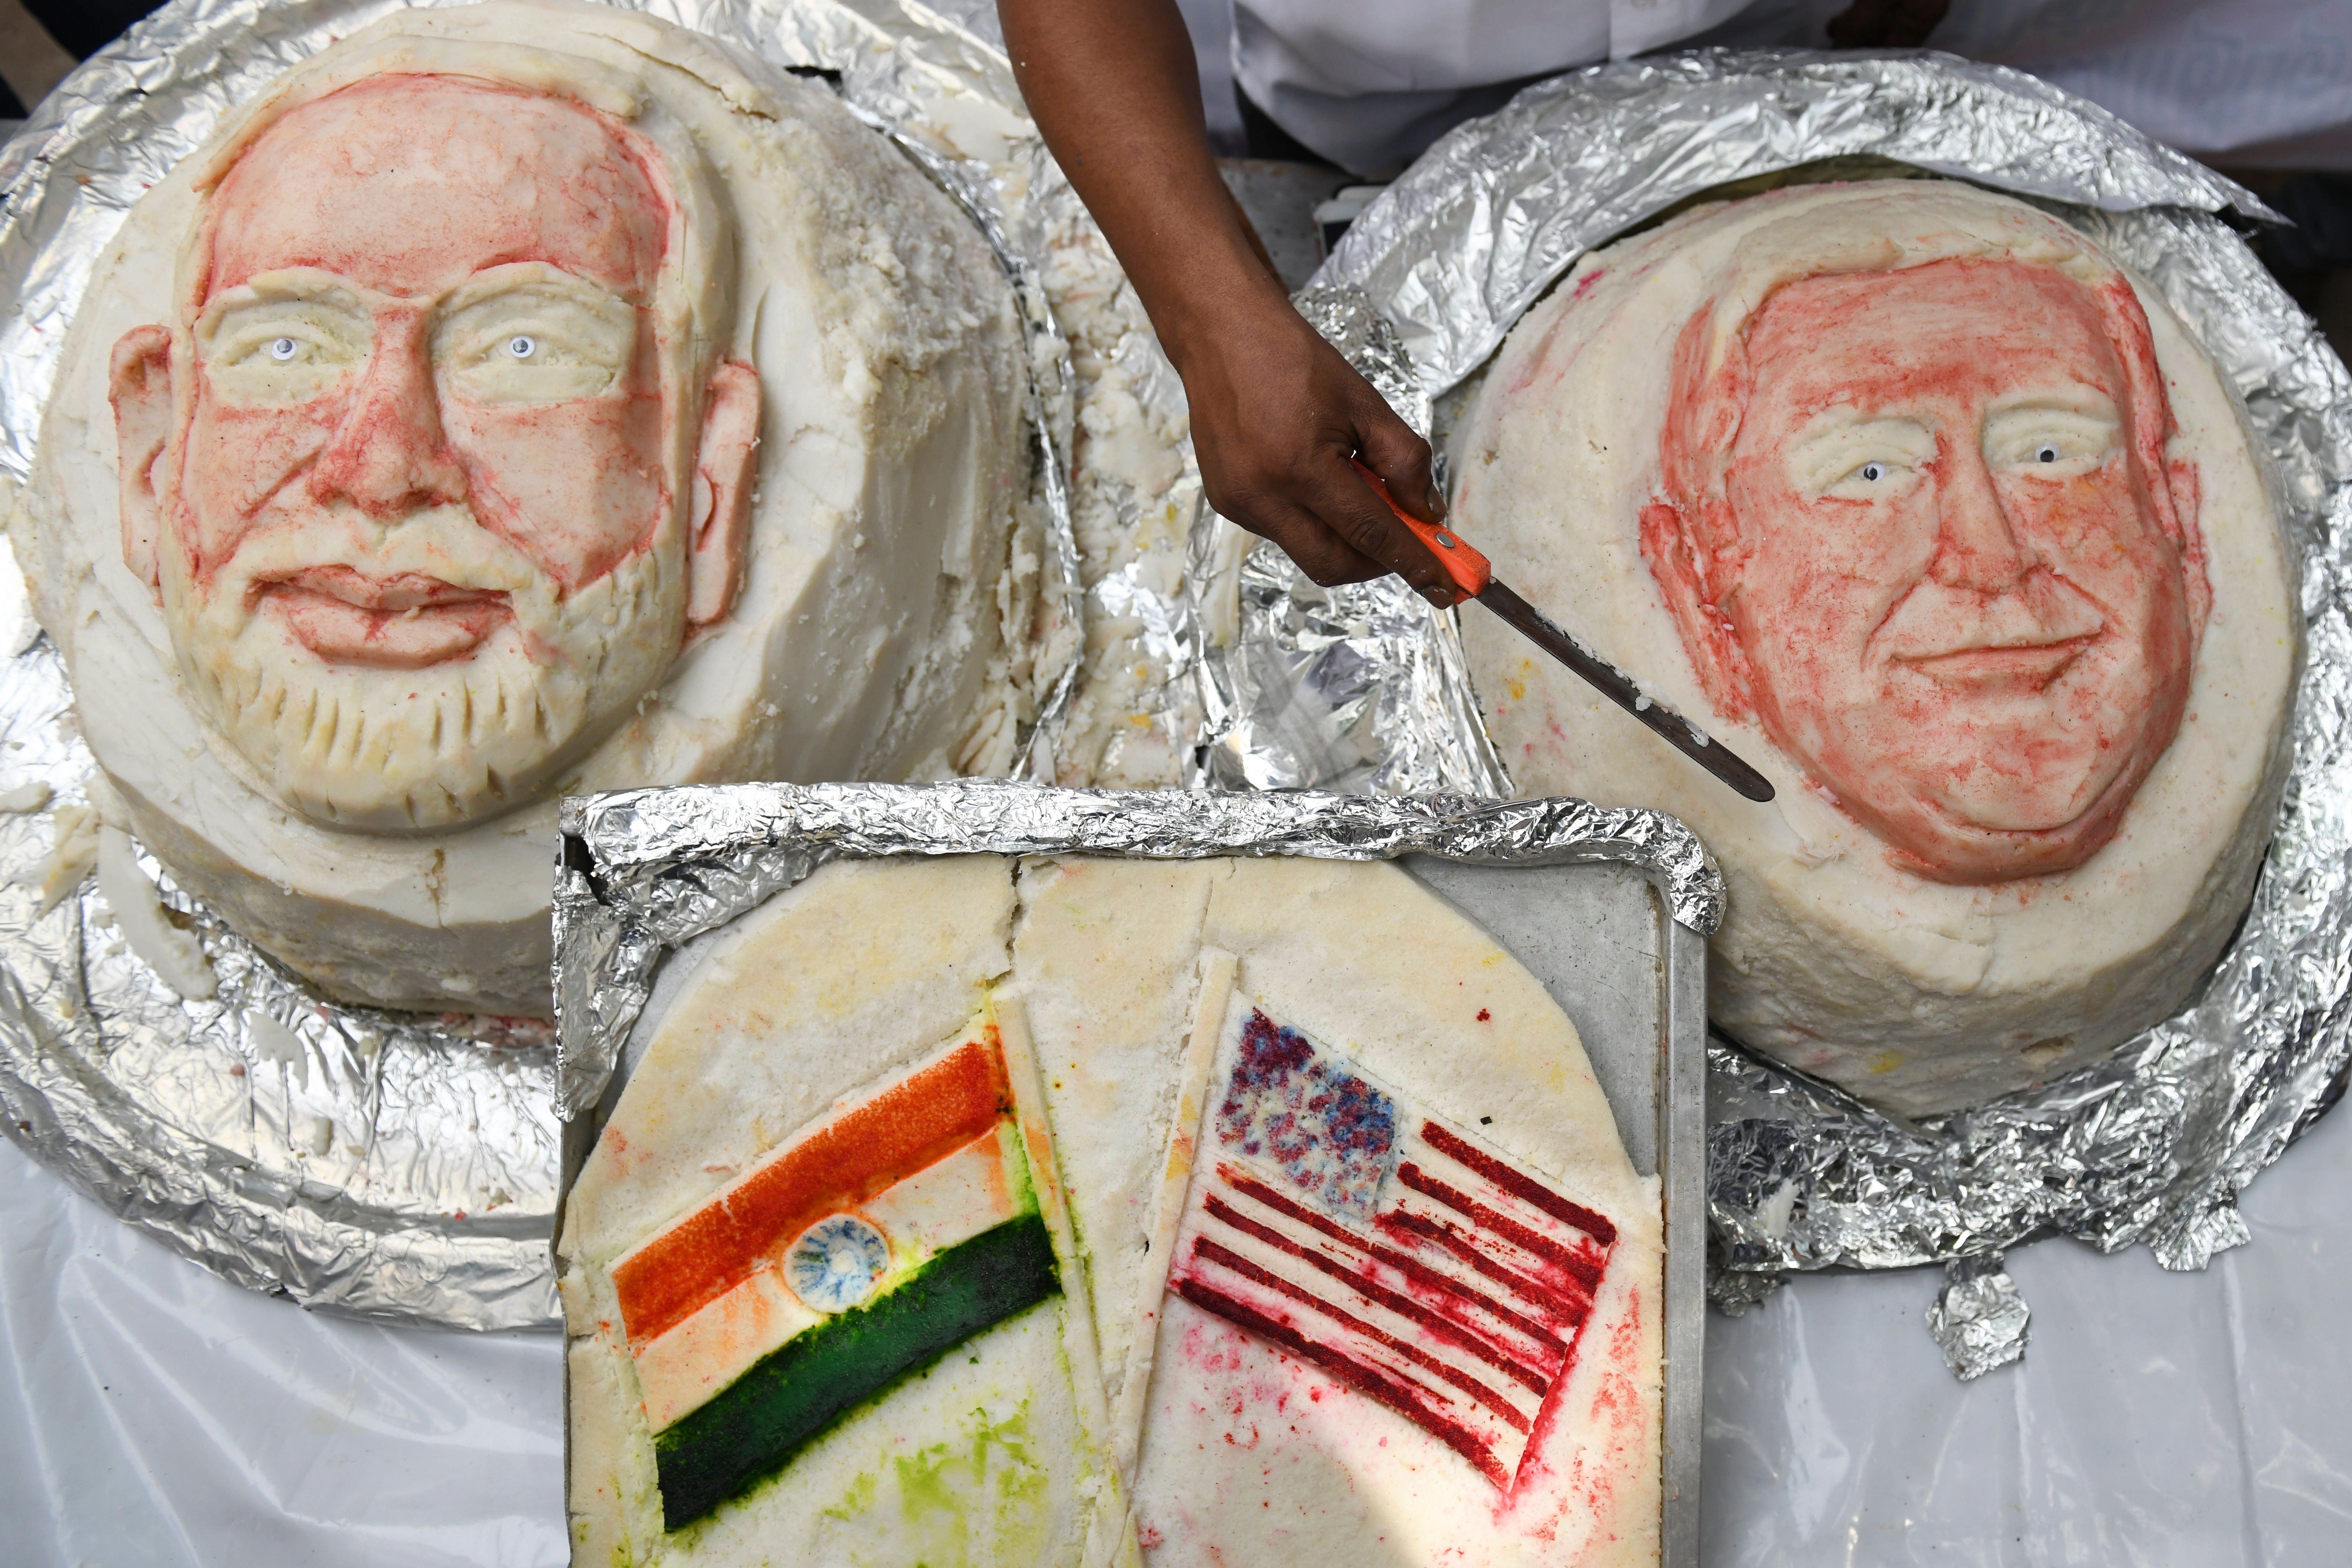 Iniyan, 49, gives final touches to a idili, savoury rice cake, decorated in the shapes of US President Donald Trump and Indian Prime Minister Narendra Modi 